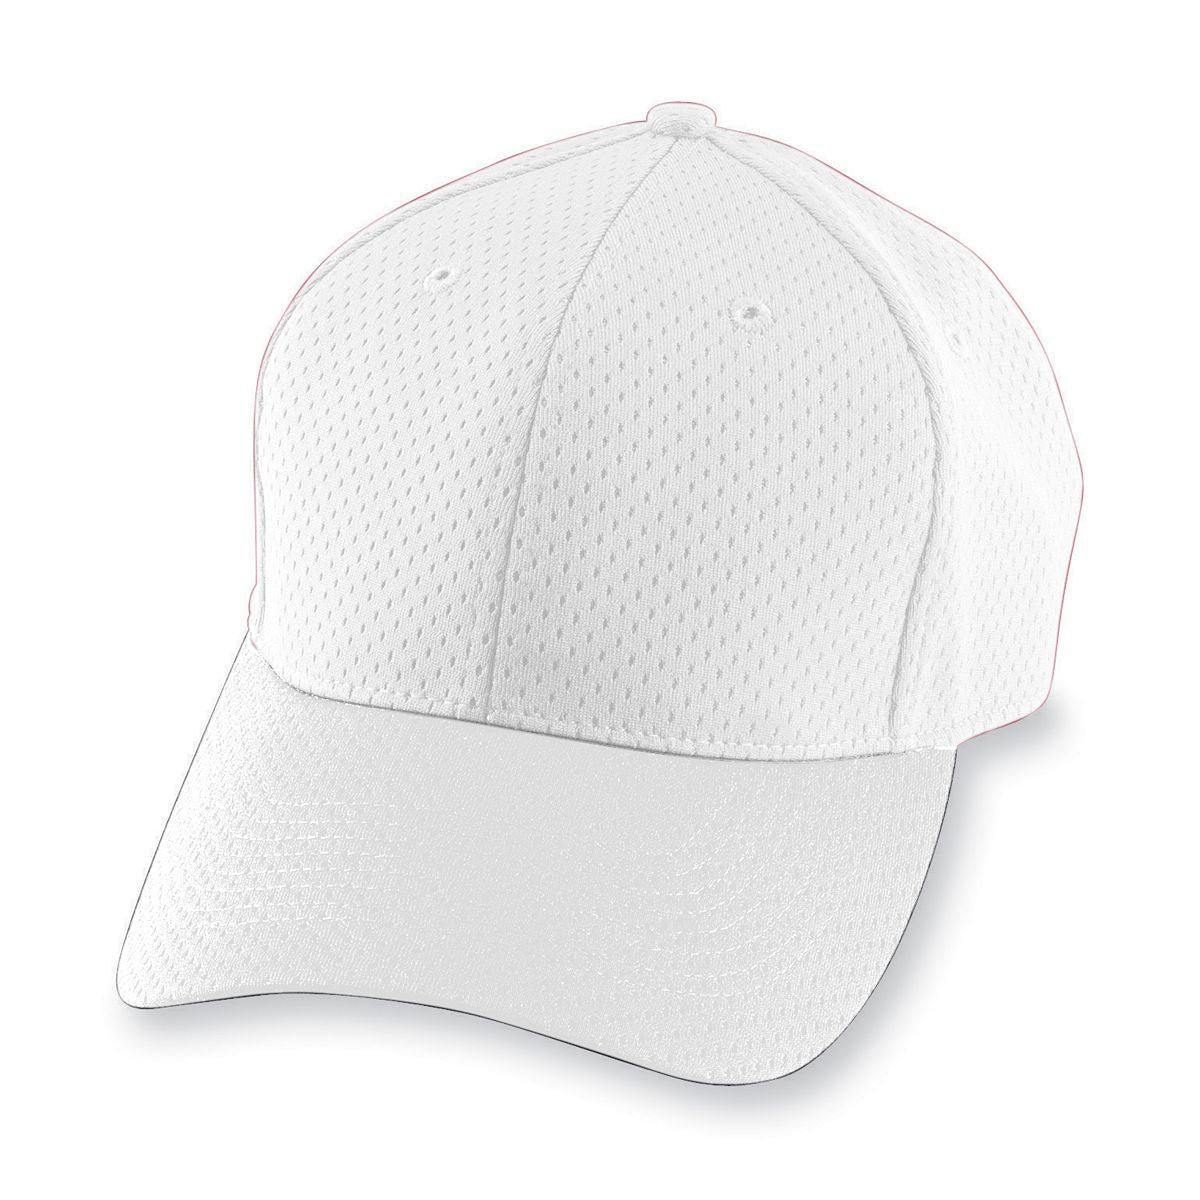 Youth Athletic Mesh Cap - 6236